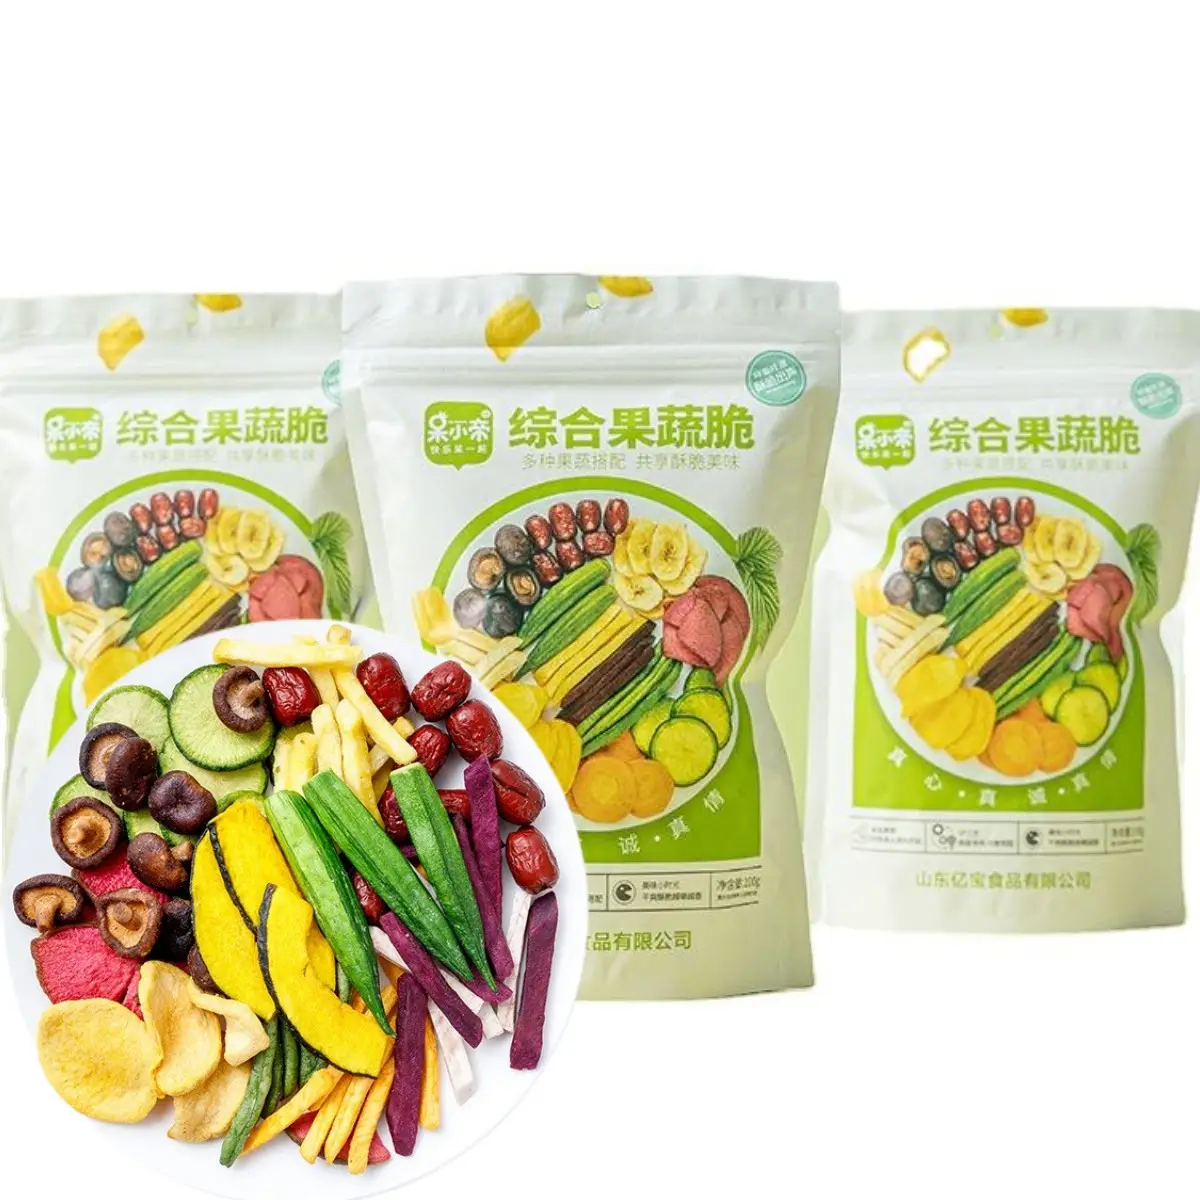 Dai xiao di 100g freeze-dried fruit and vegetable 12 types of veggies and fruits vegetable chips